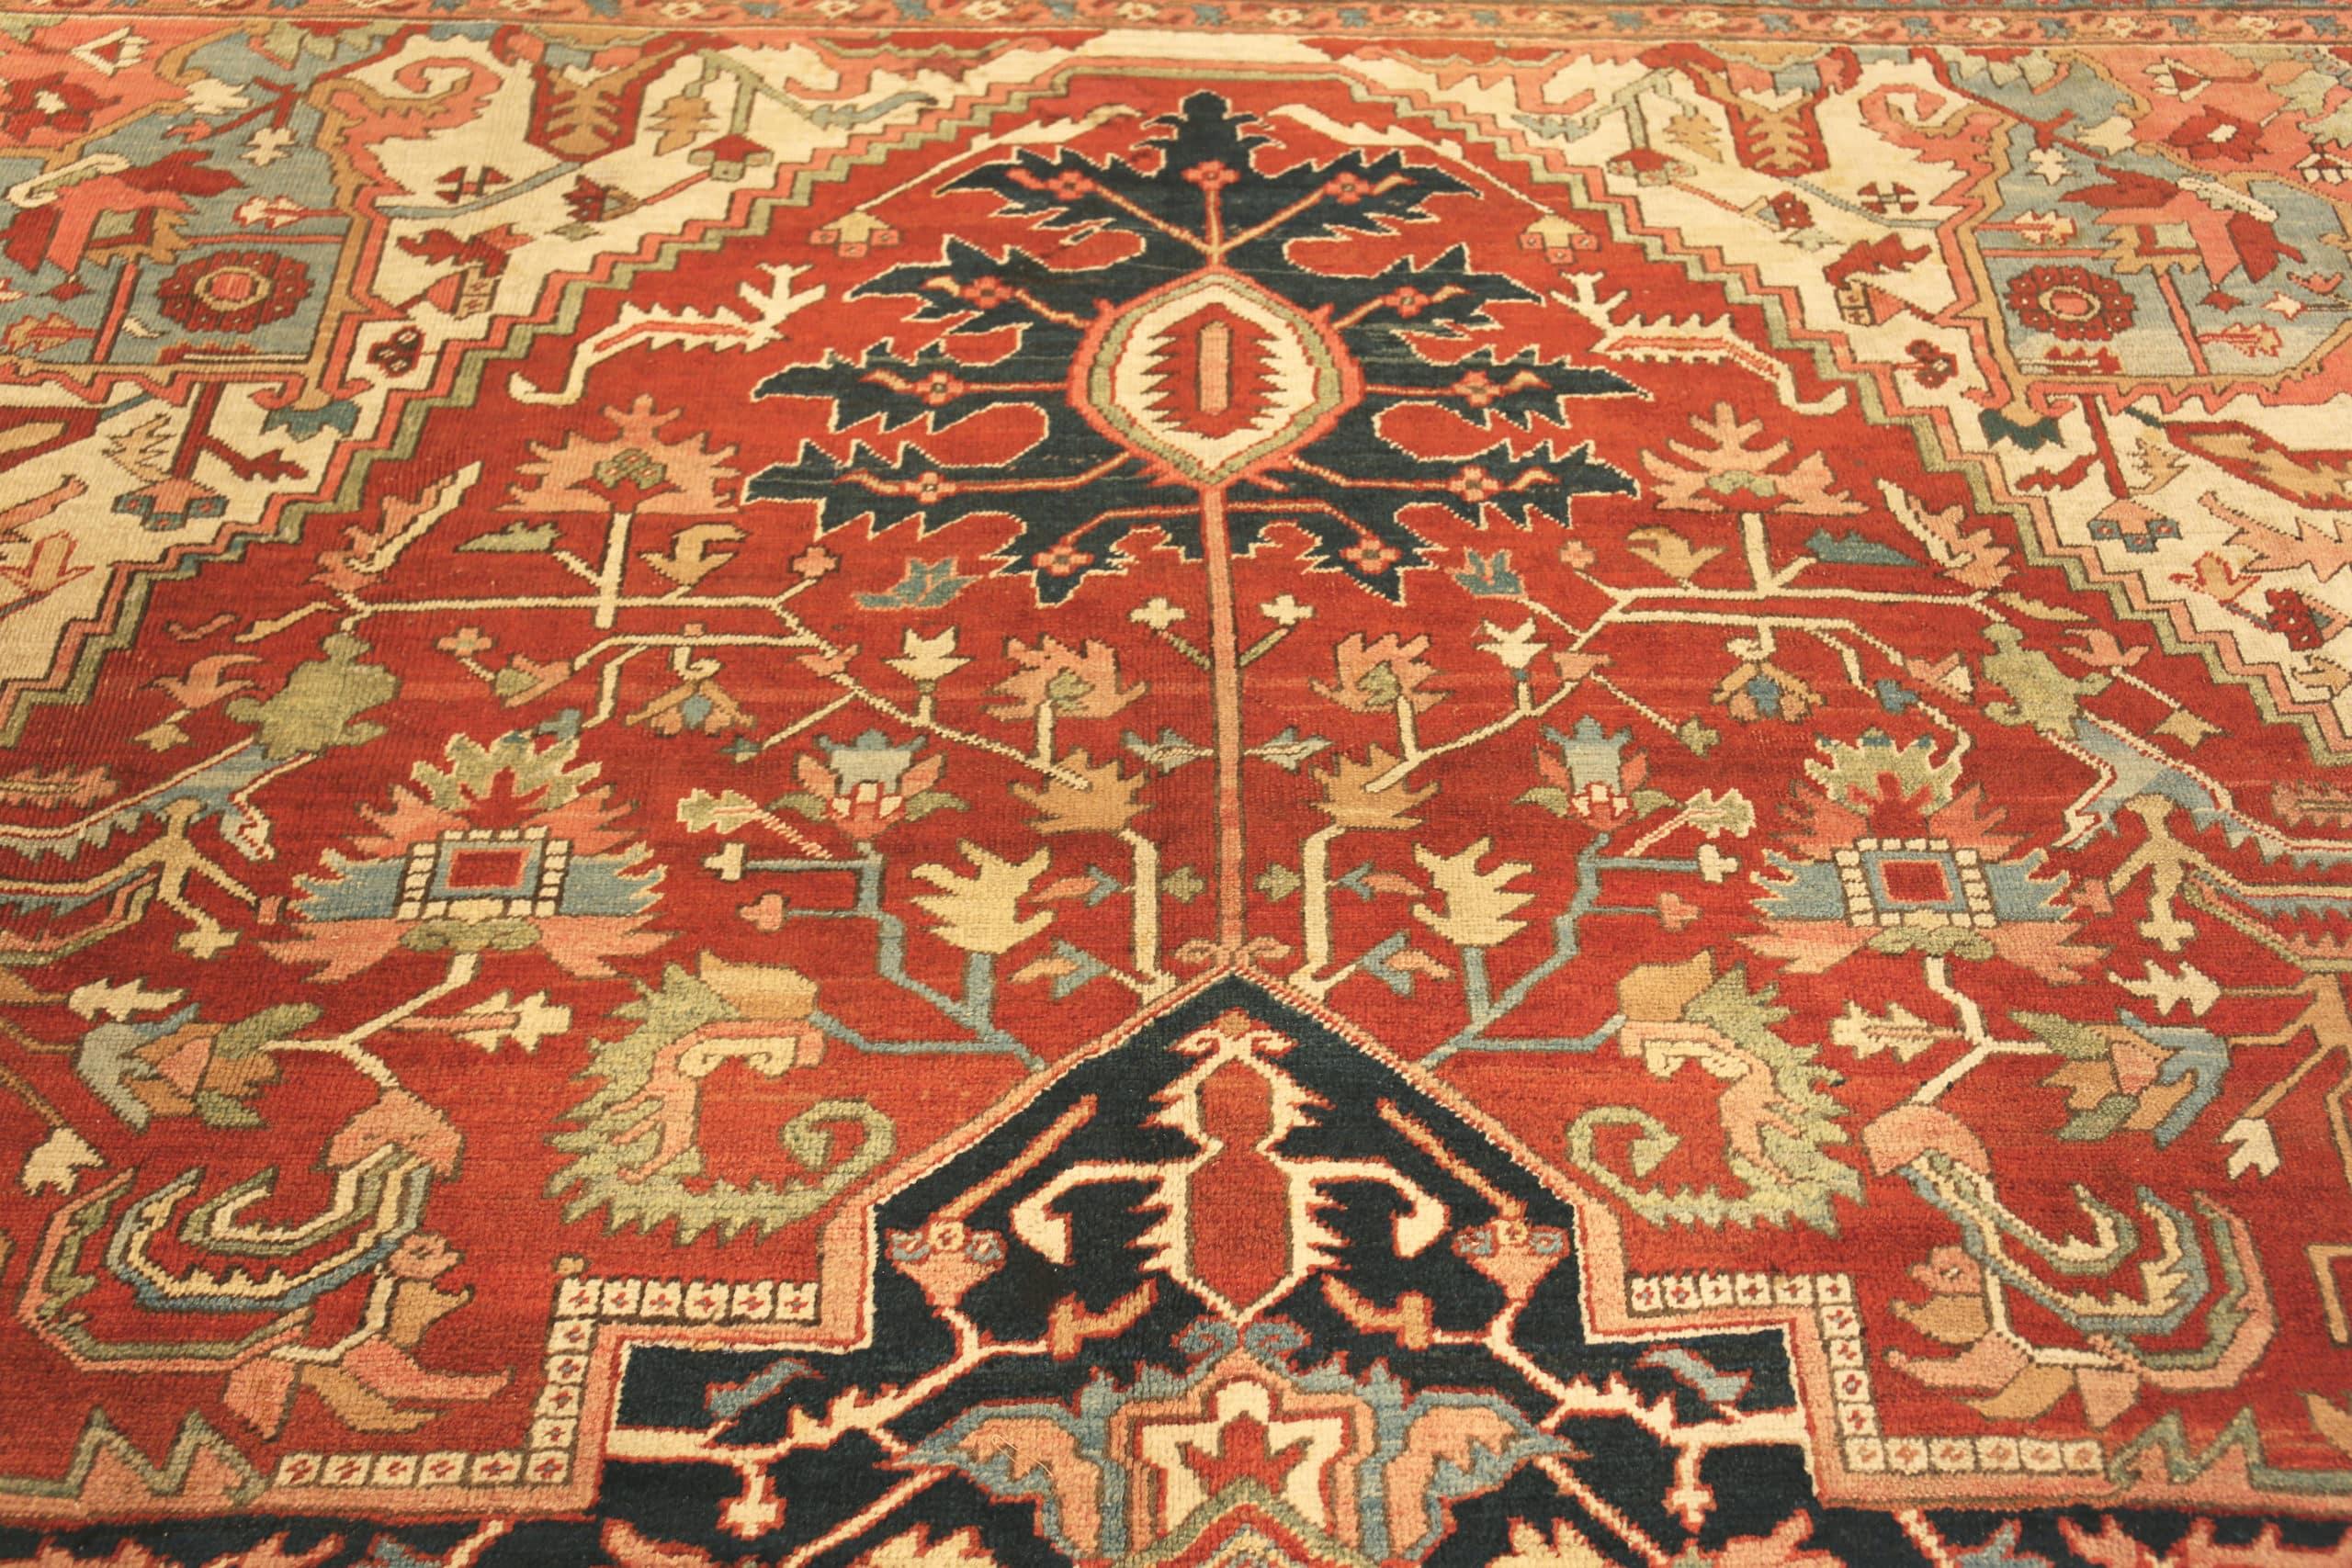 Geometric Large Rustic Antique Tribal Persian Heriz Medallion Rug, Country of Origin: Persia, Circa date: 1920. Size: 11 ft 4 in x 17 ft 8 in (3.45 m x 5.38 m)
